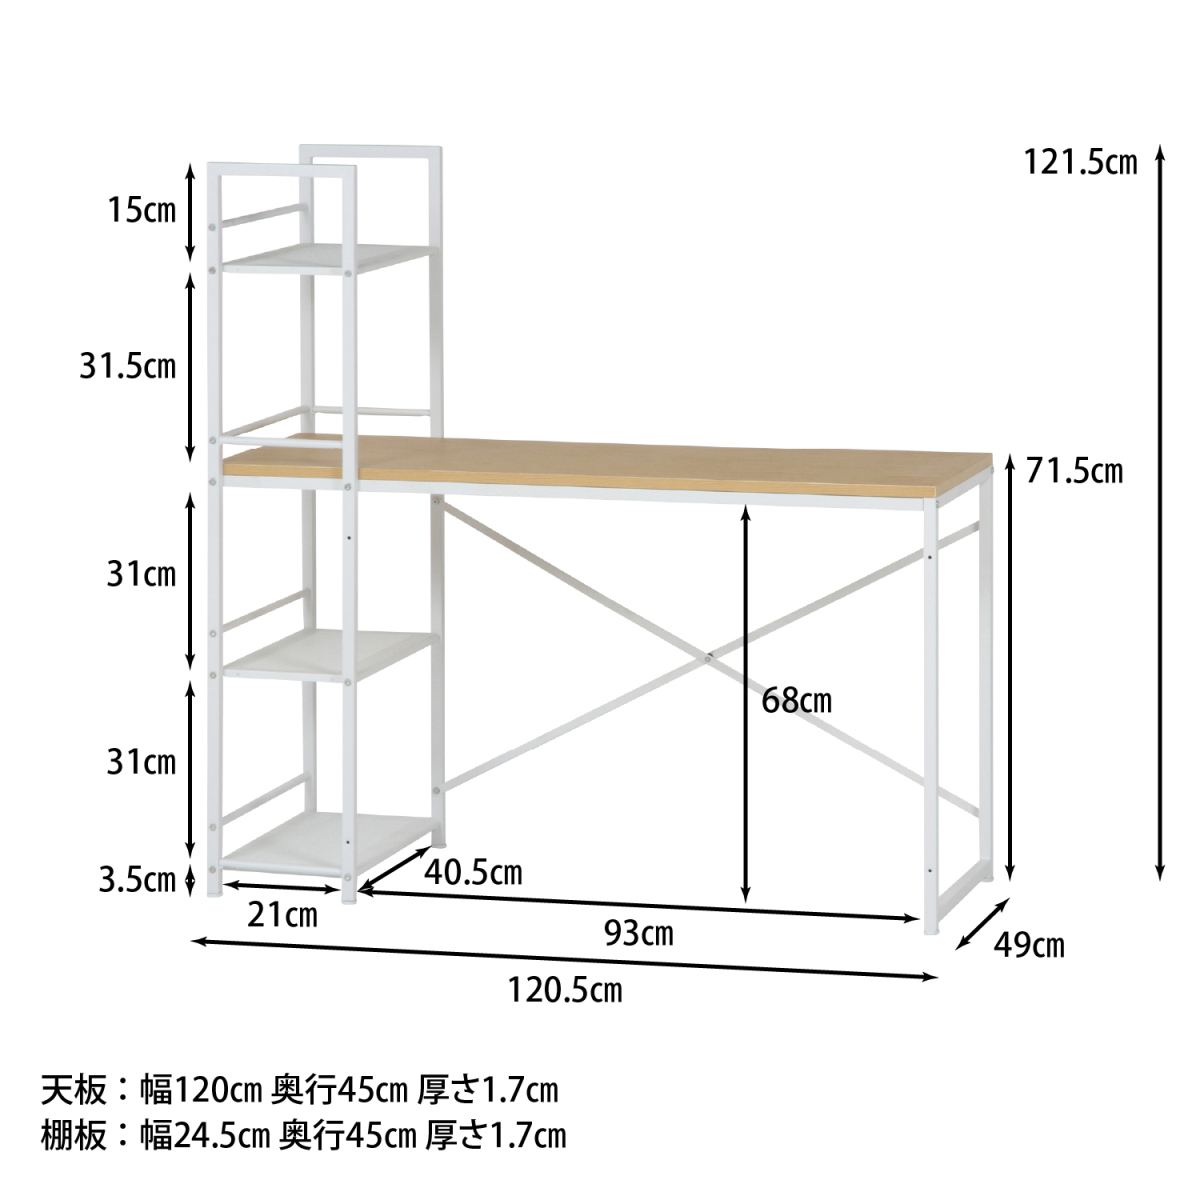  rack attaching Work desk width 120.5cm depth 49cm maple color [ new goods ][ free shipping ( one part region excepting )]